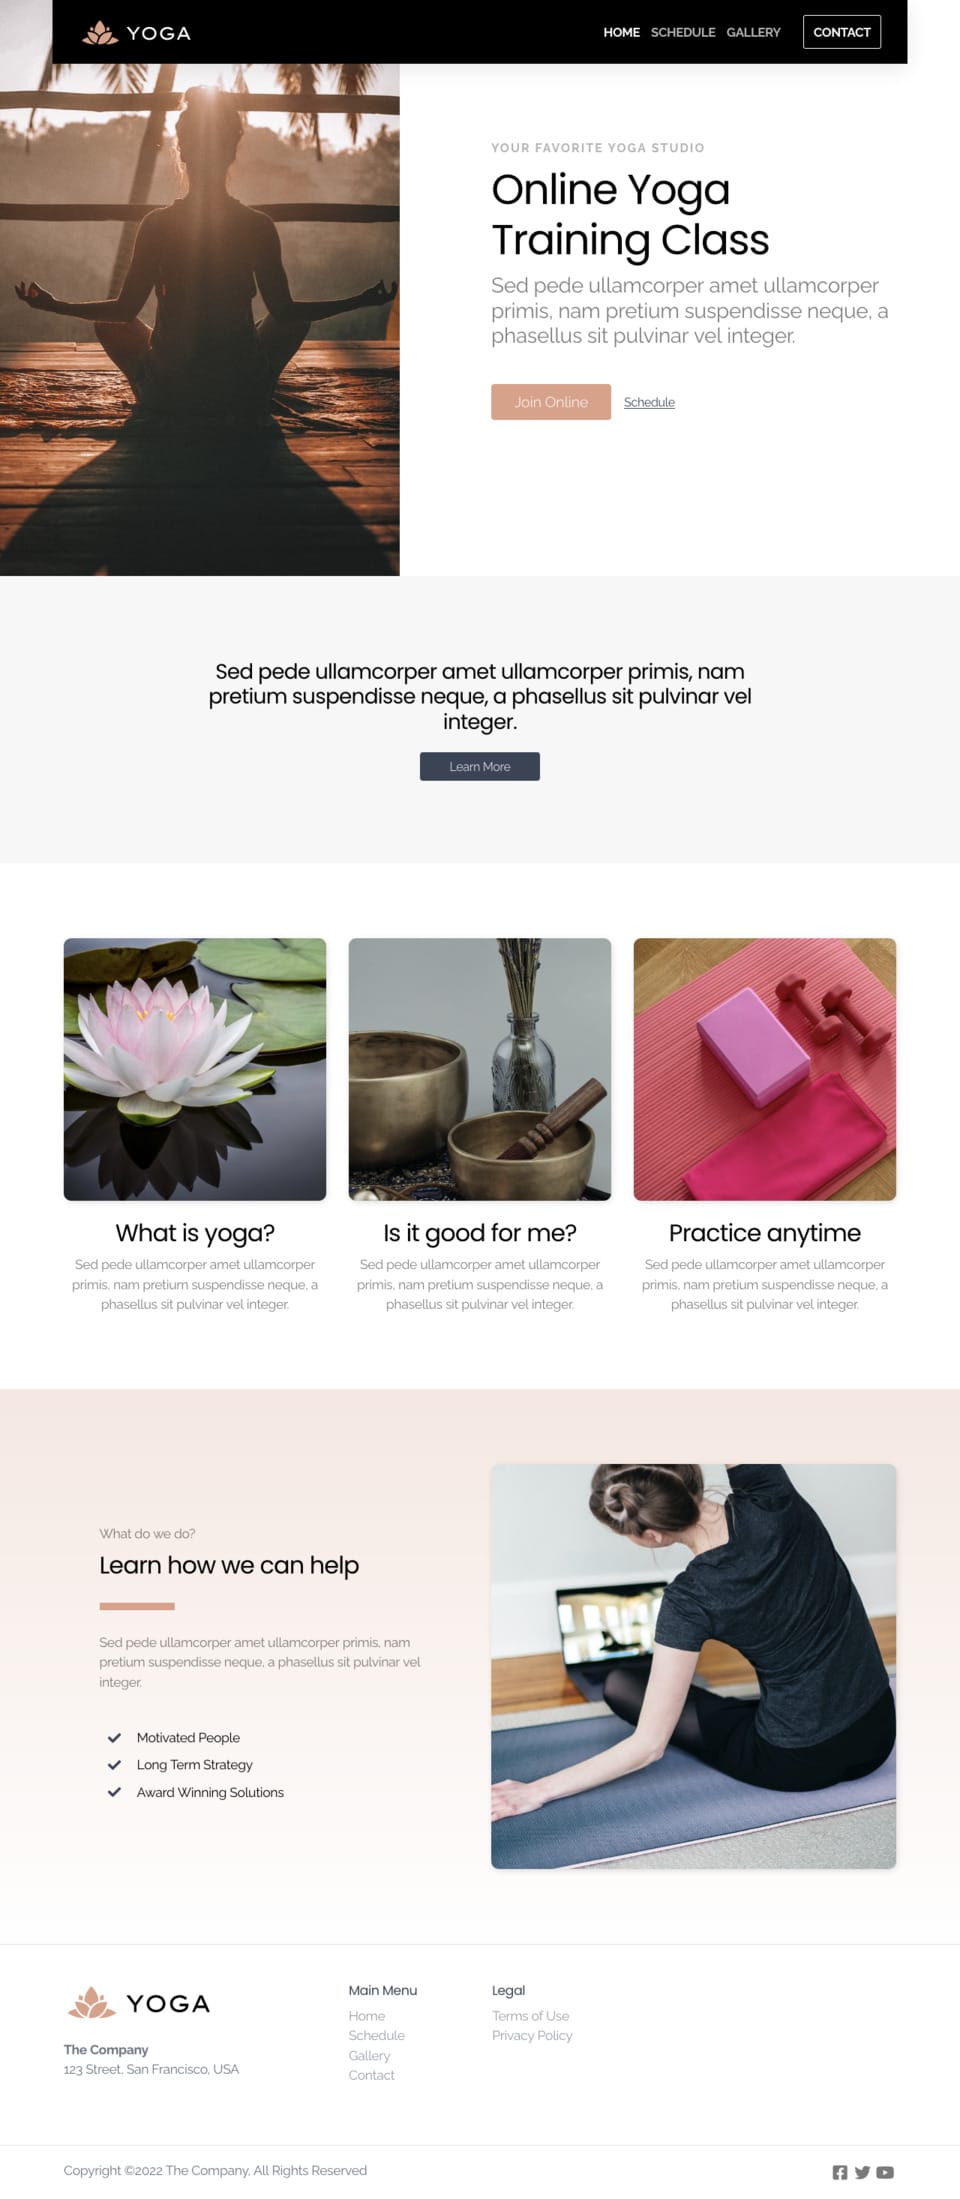 Yoga Website Template - Ideal for yoga studios, meditation centers, health and wellness blogs, relaxation retreats, and more